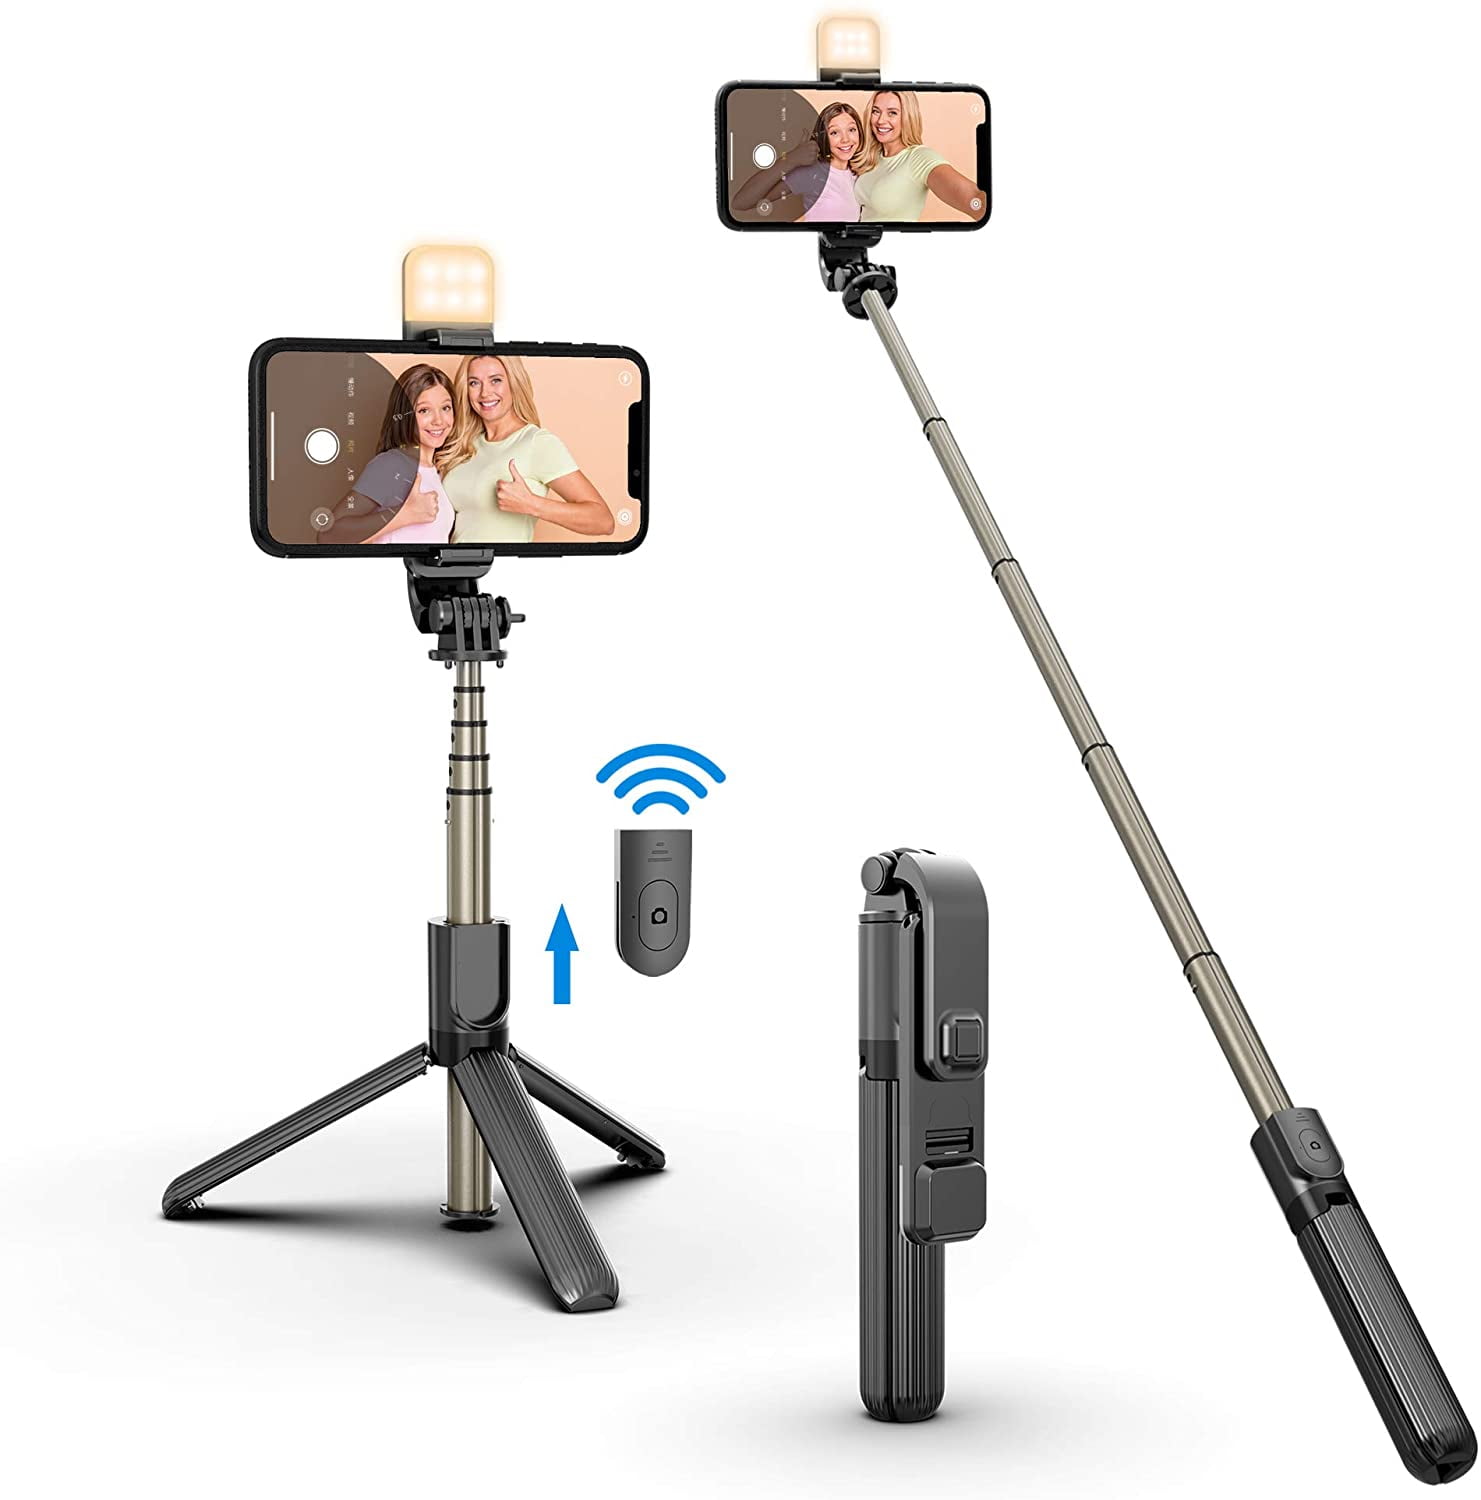 Black Mini Phone Tripod Stand & Extendable Selfie Stick Tripod Portable Travel Tripod Camera Holder with Bluetooth Remote and Universal Smartphone Mount for I Phone Android Phone,Camera 